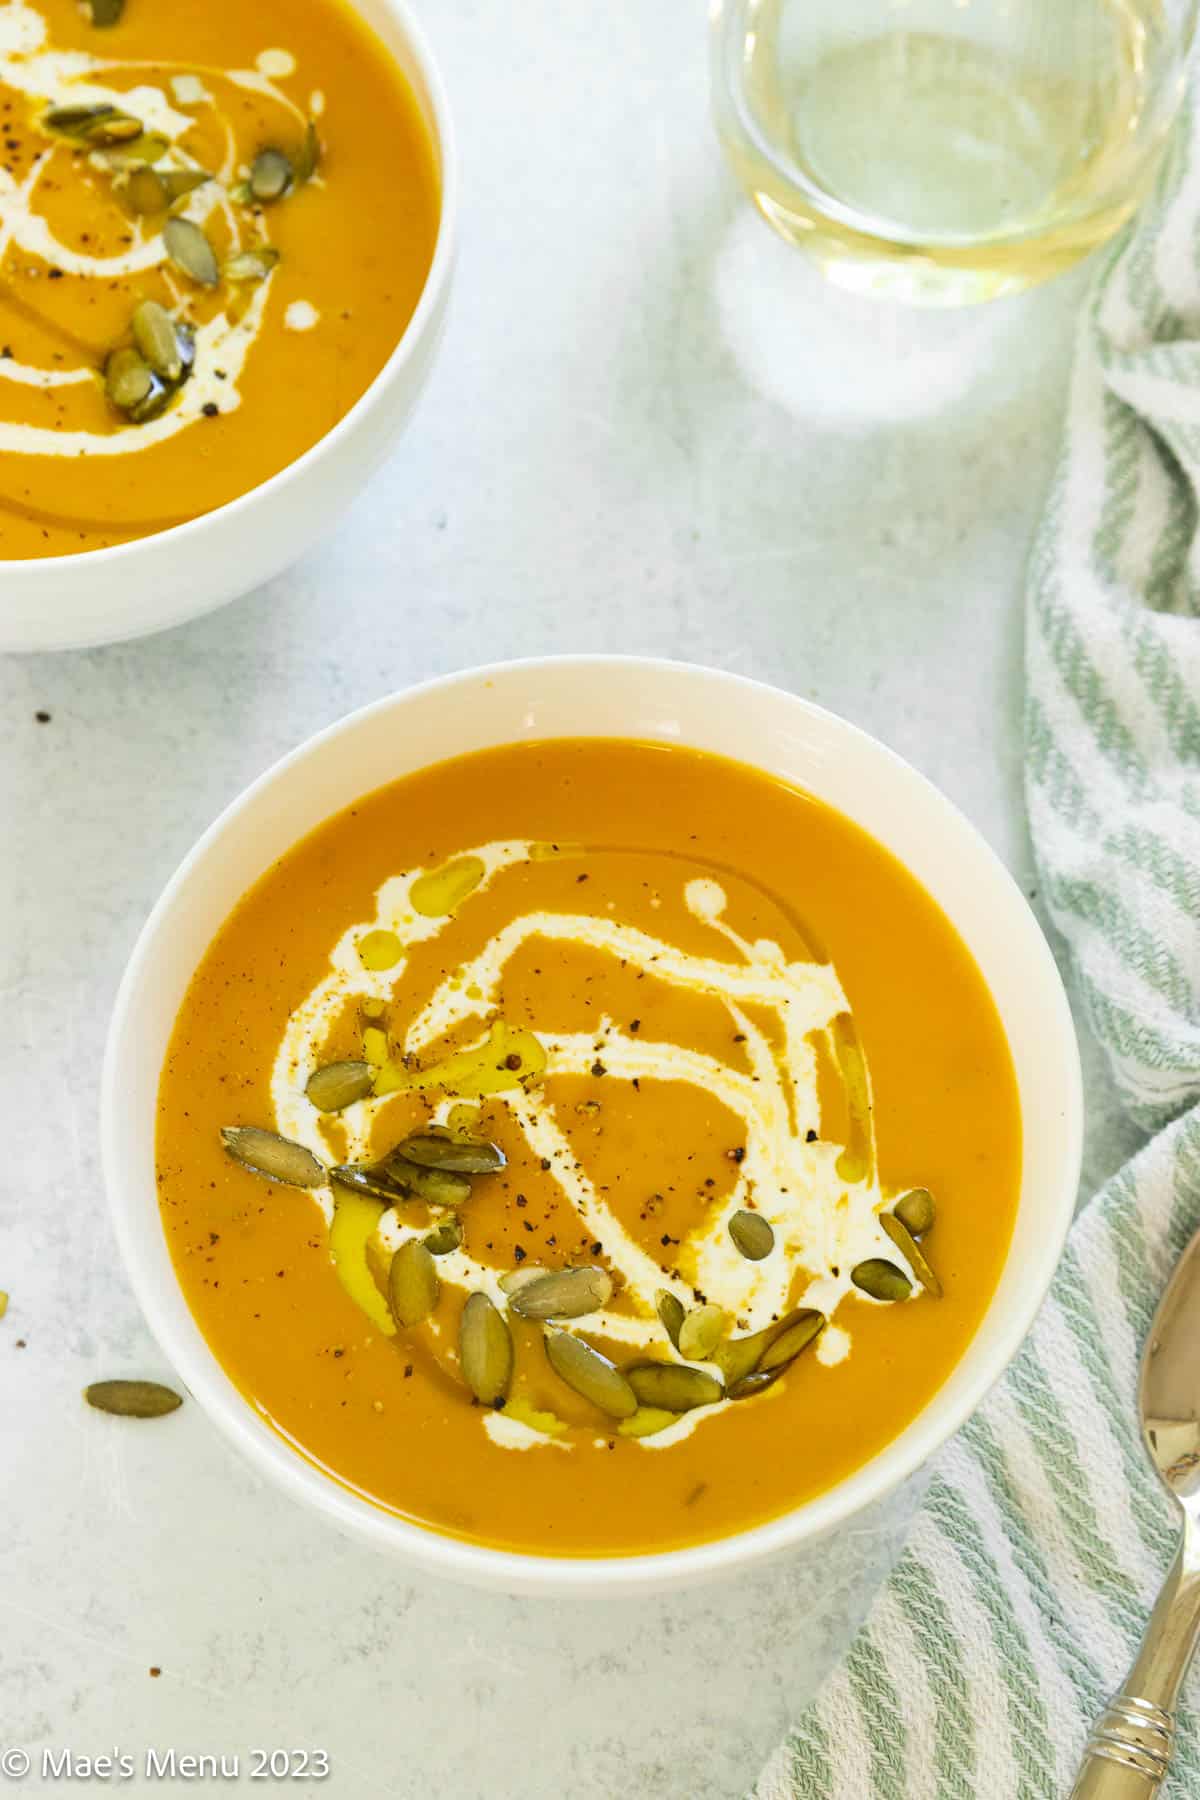 Two bowls of butternut squash soup on the counter with a glass of wine and towel.